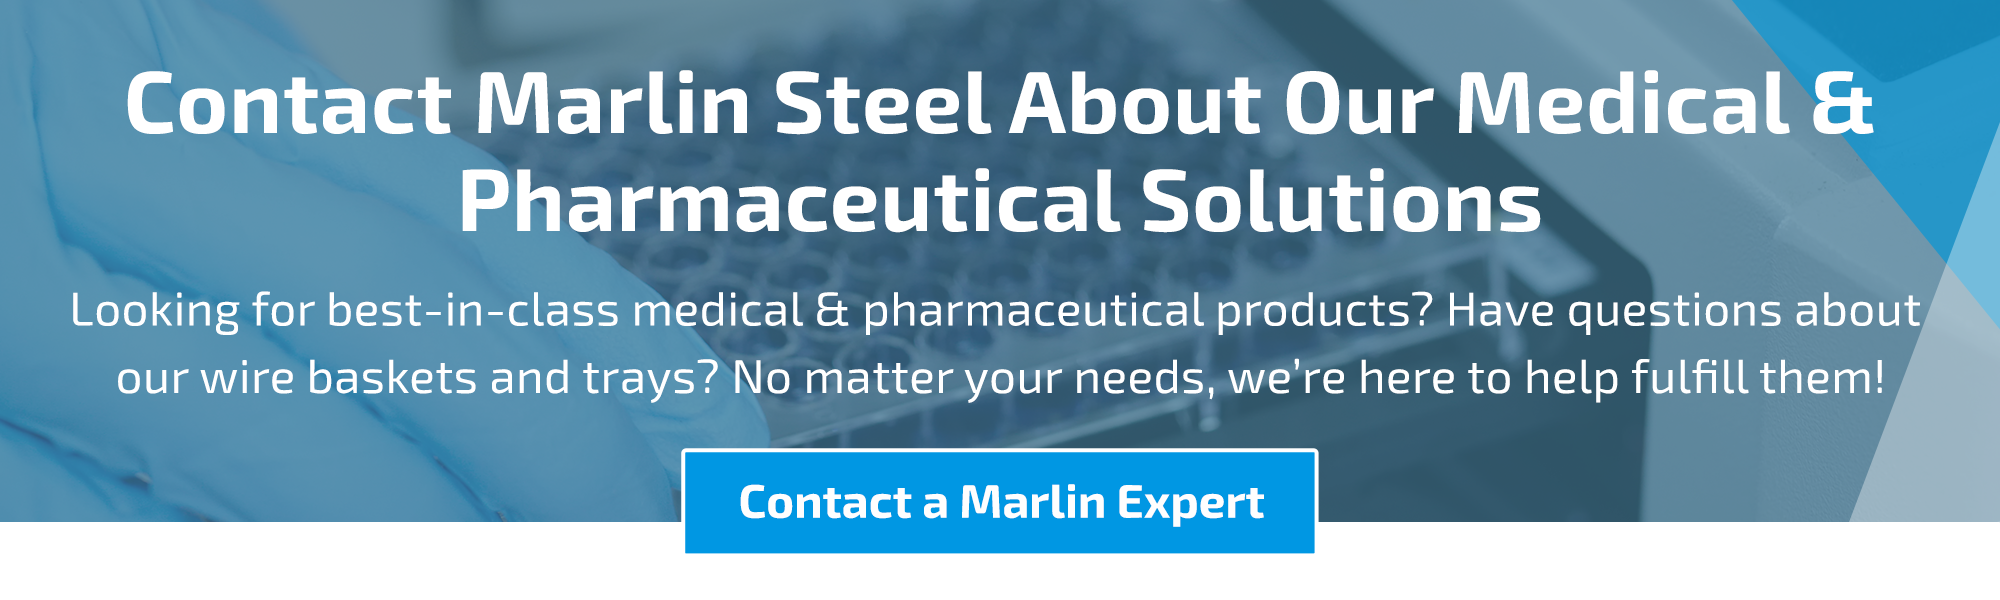 Contact Marlin Steel Medical Pharmaceutical Solutions